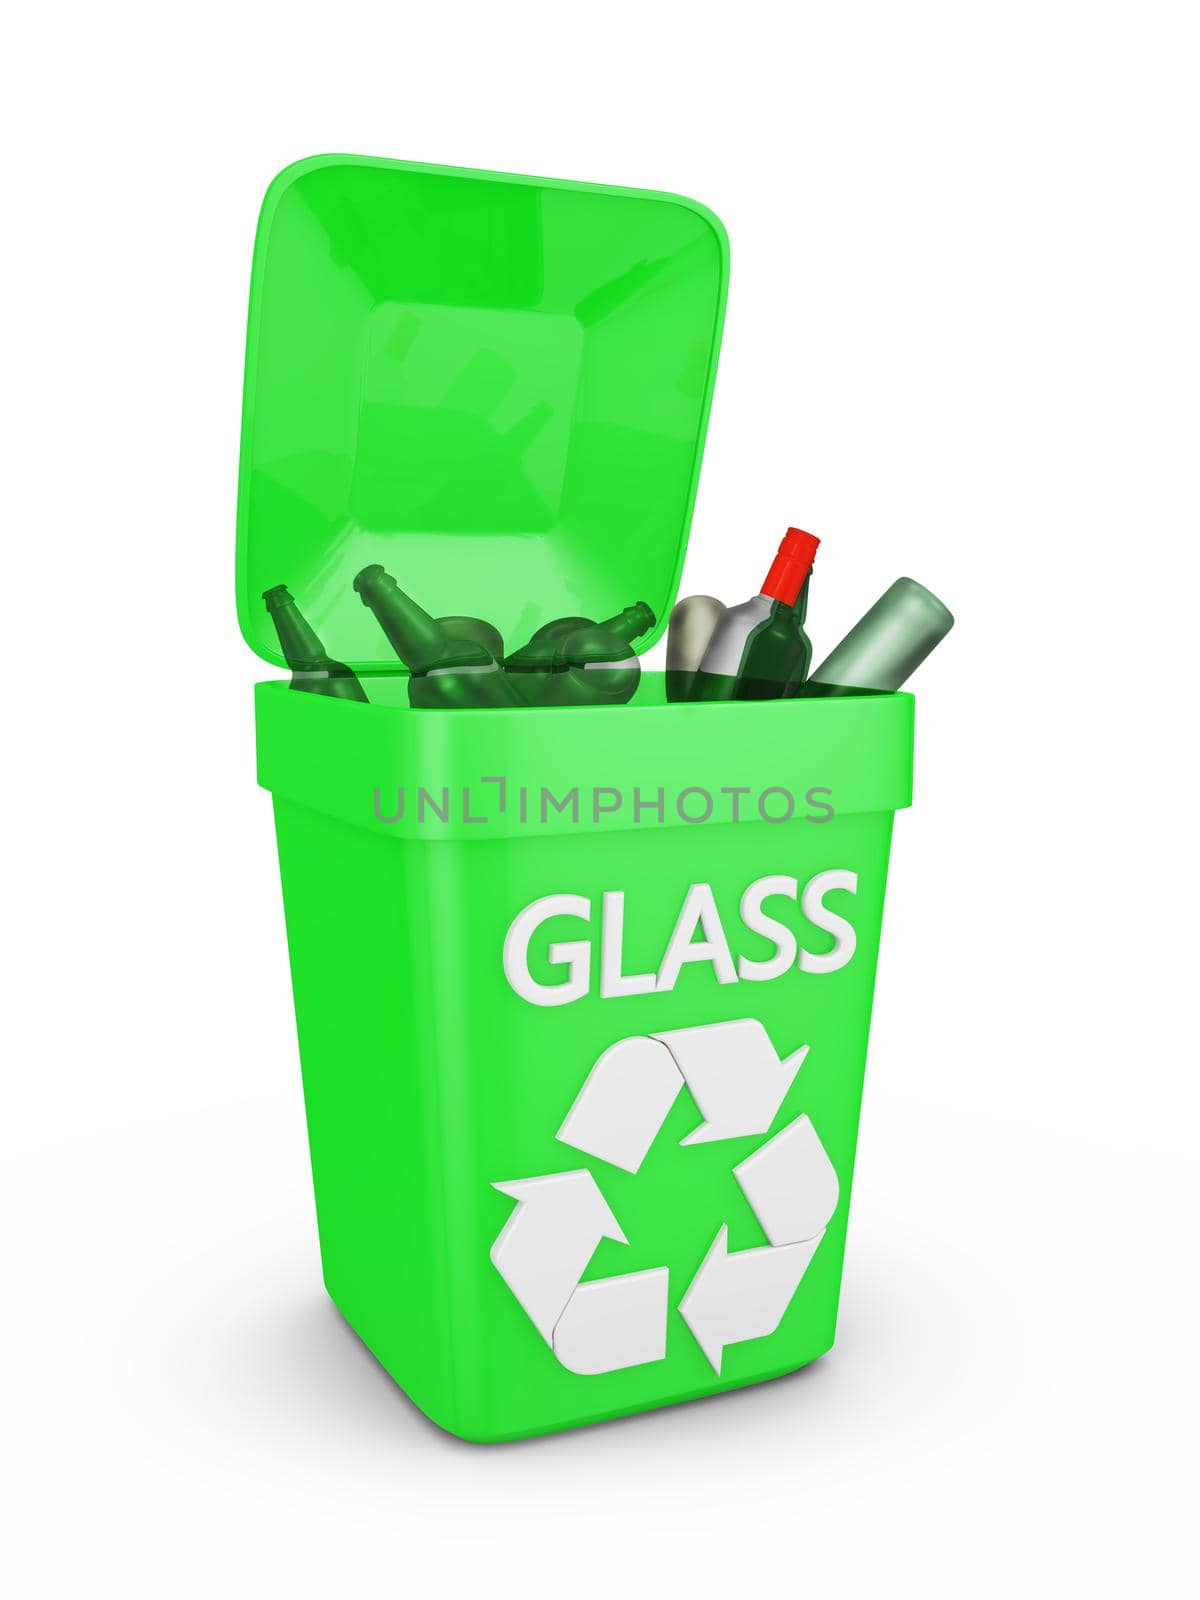 Waste container of glass on a white background